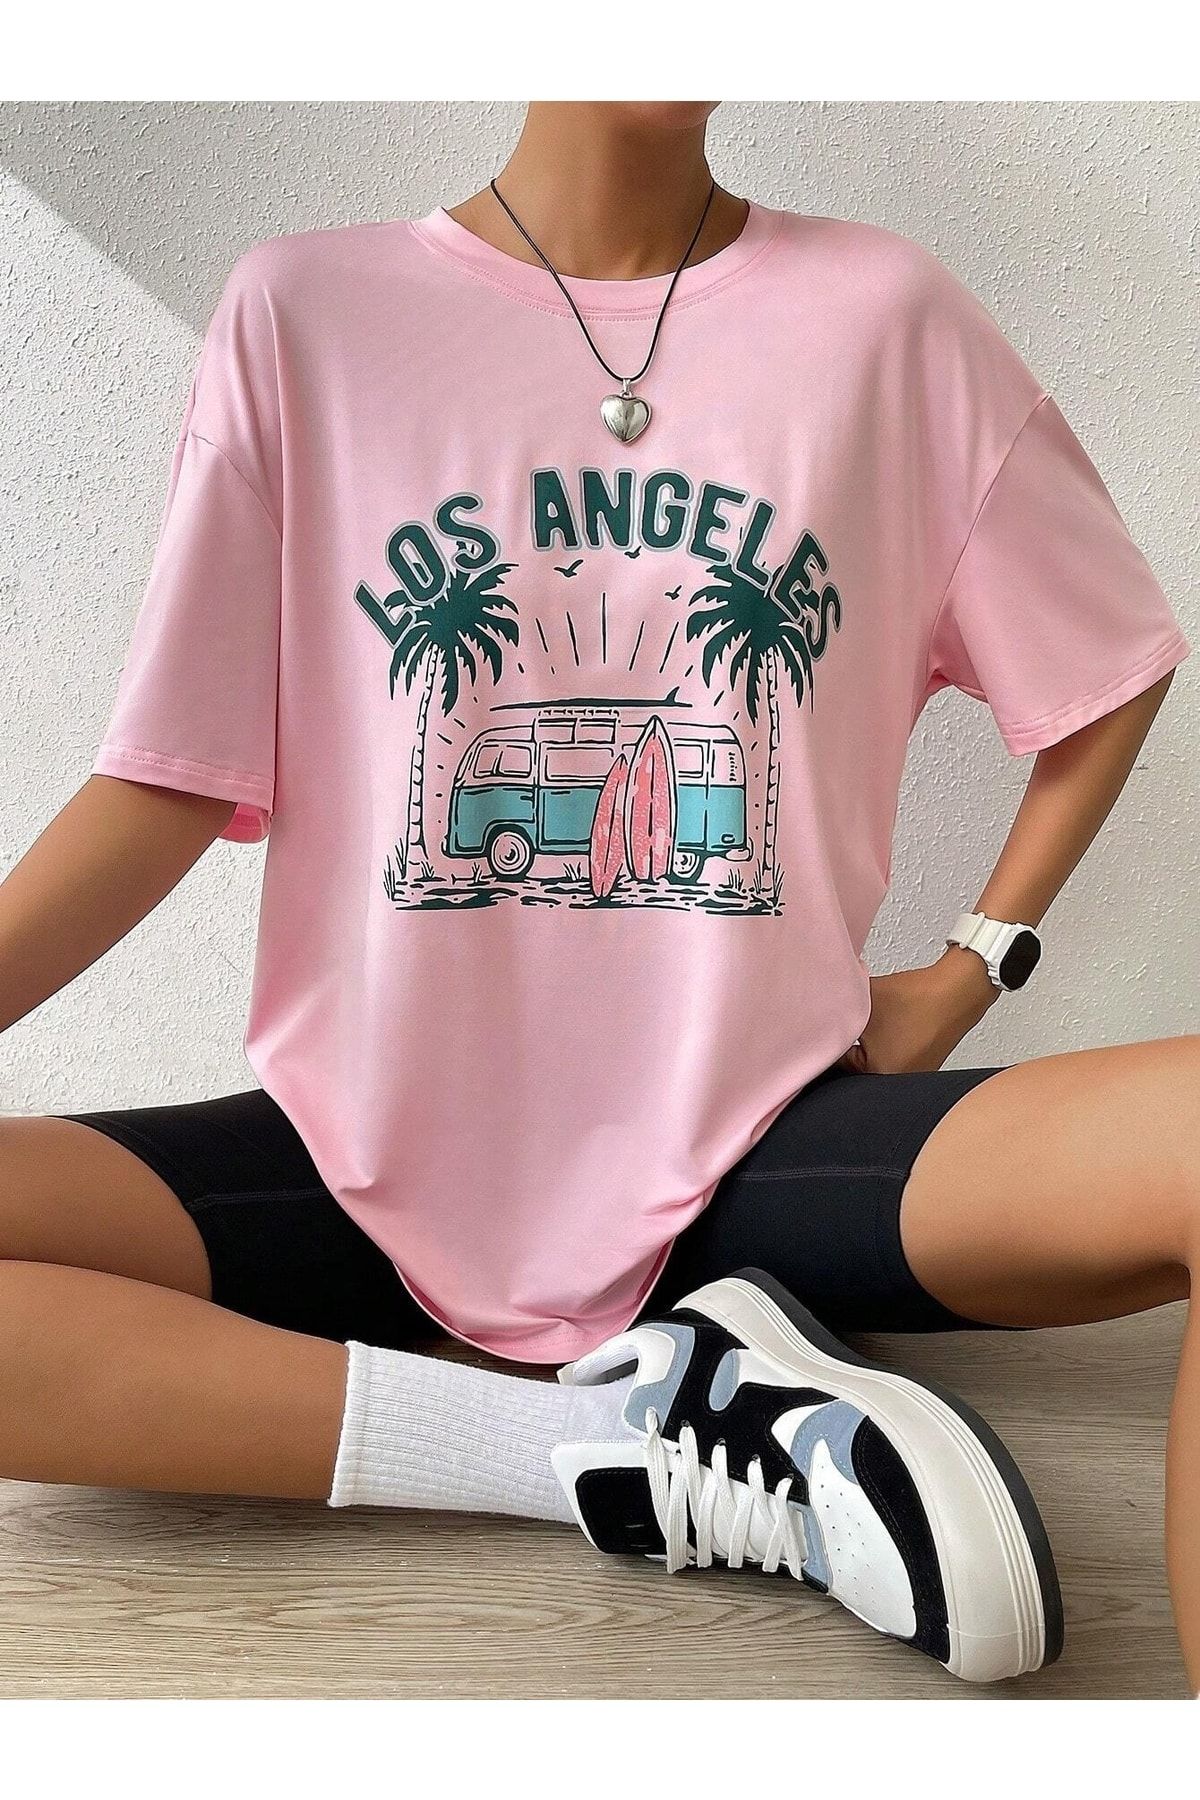 Los Angeles Oversize T-Shirt (Pink)